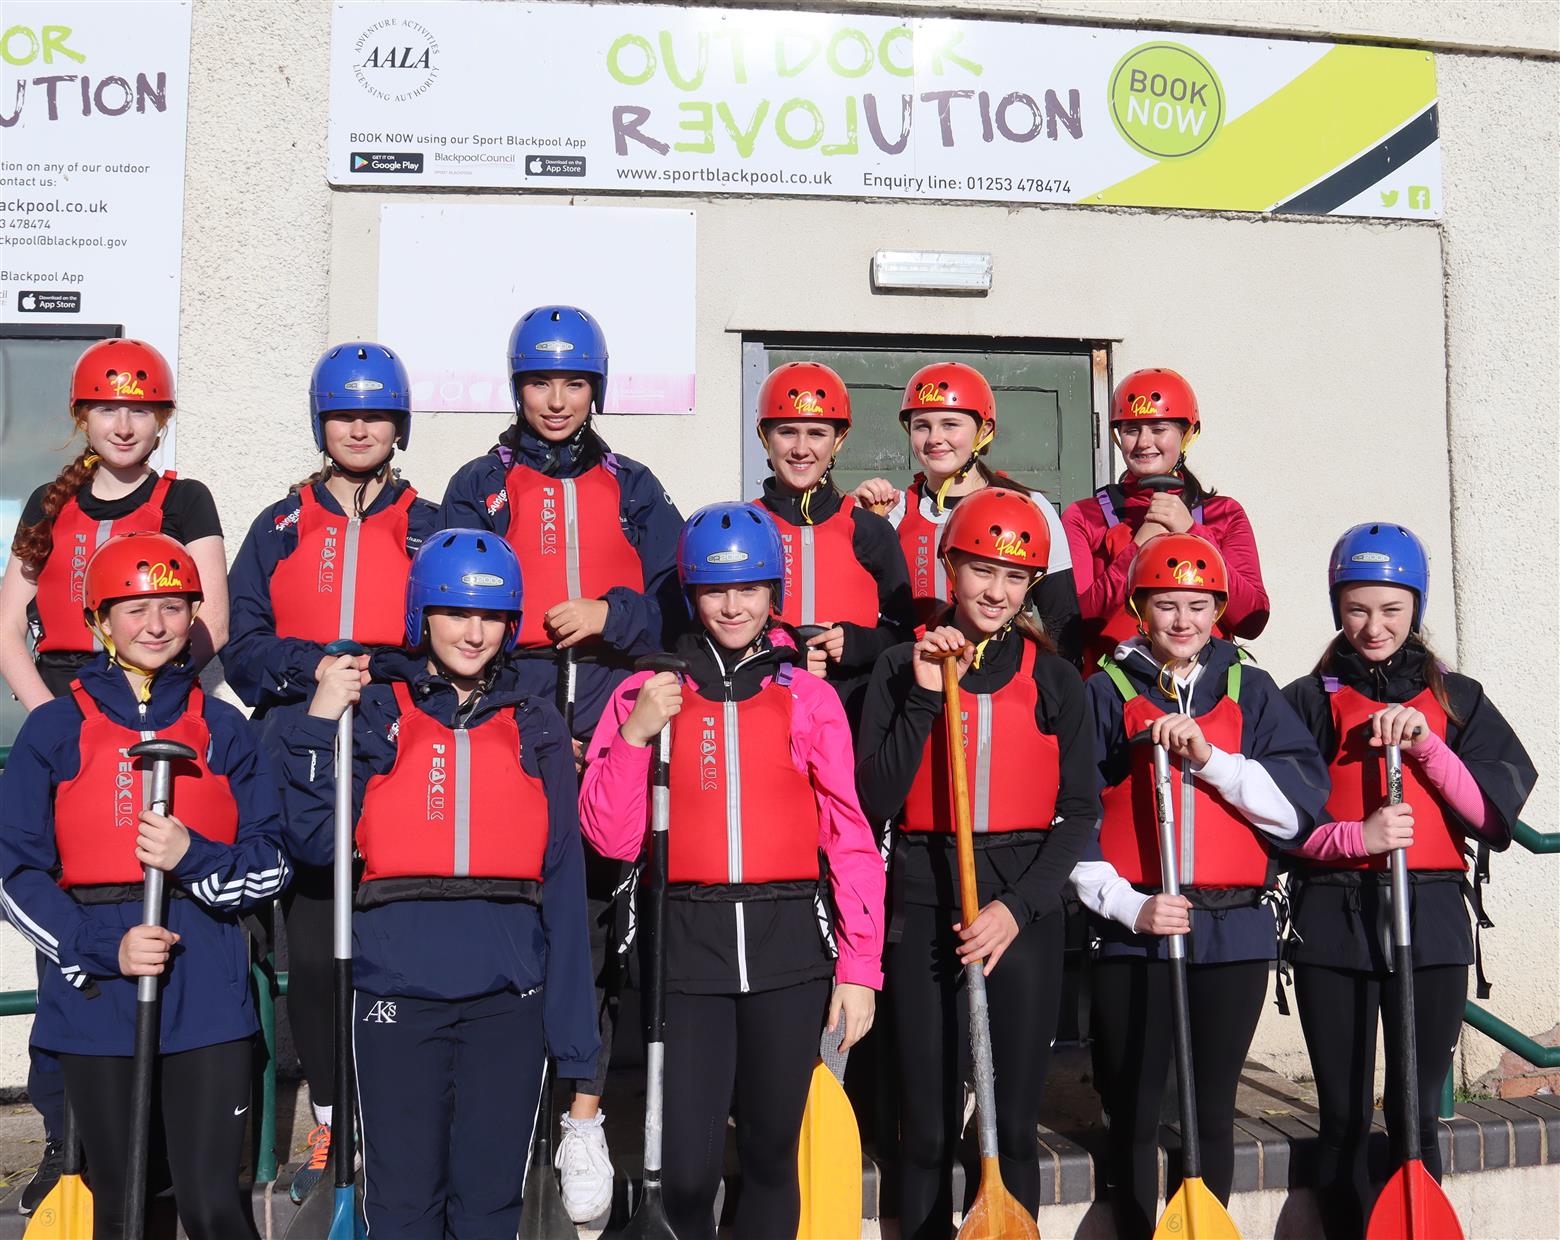 U15 Hockey players enjoy a morning of fun away from the pitch at Outdoor Revolution, Blackpool.